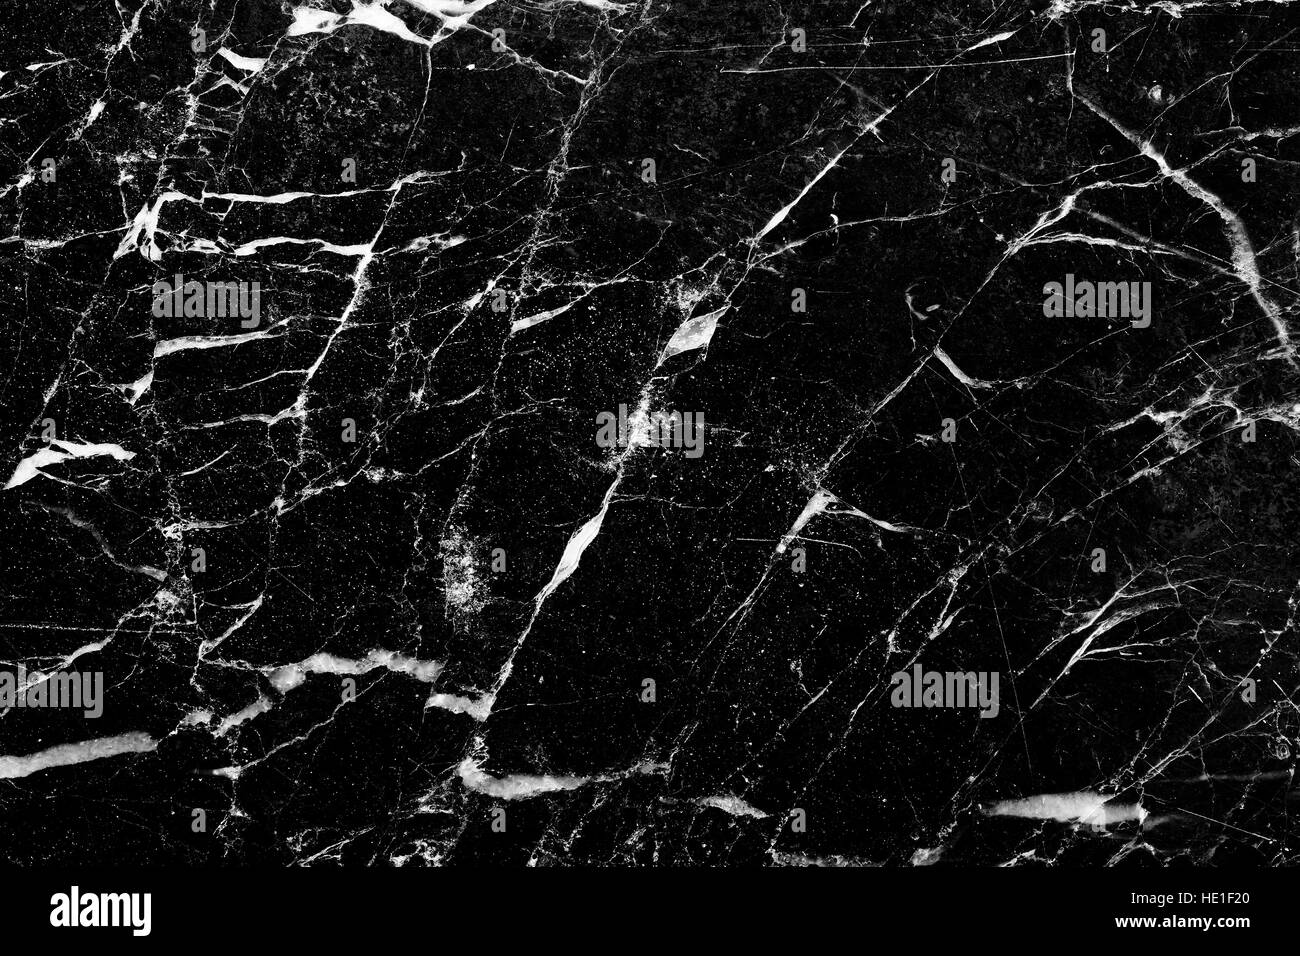 White patterned natural of black and white marble texture, abstract backgroud for product design. Stock Photo